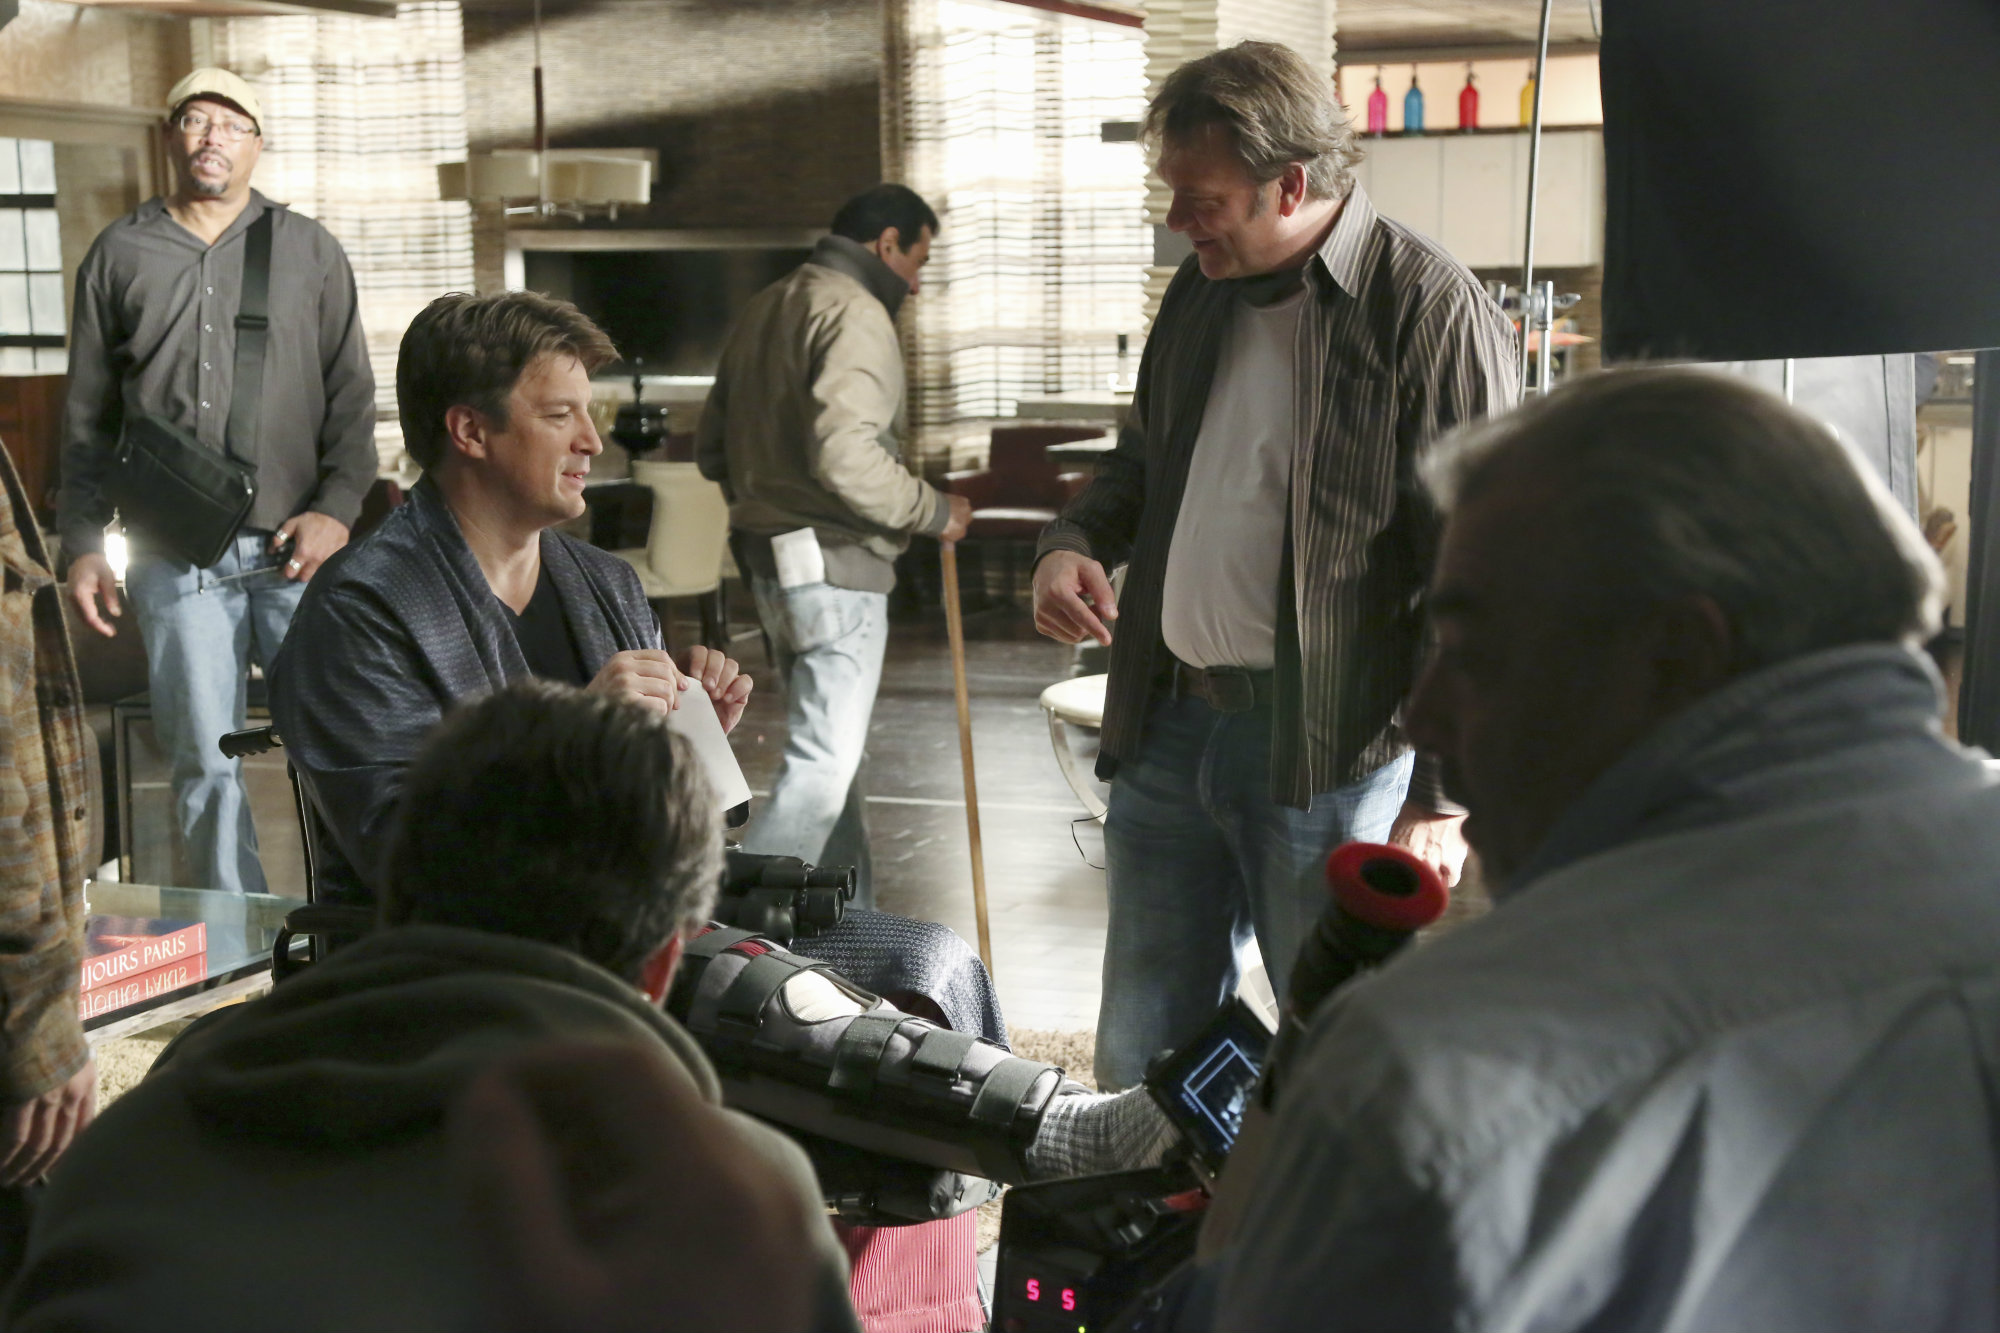 CASTLE - Behind-the-Scenes of 'The Lives of Others'